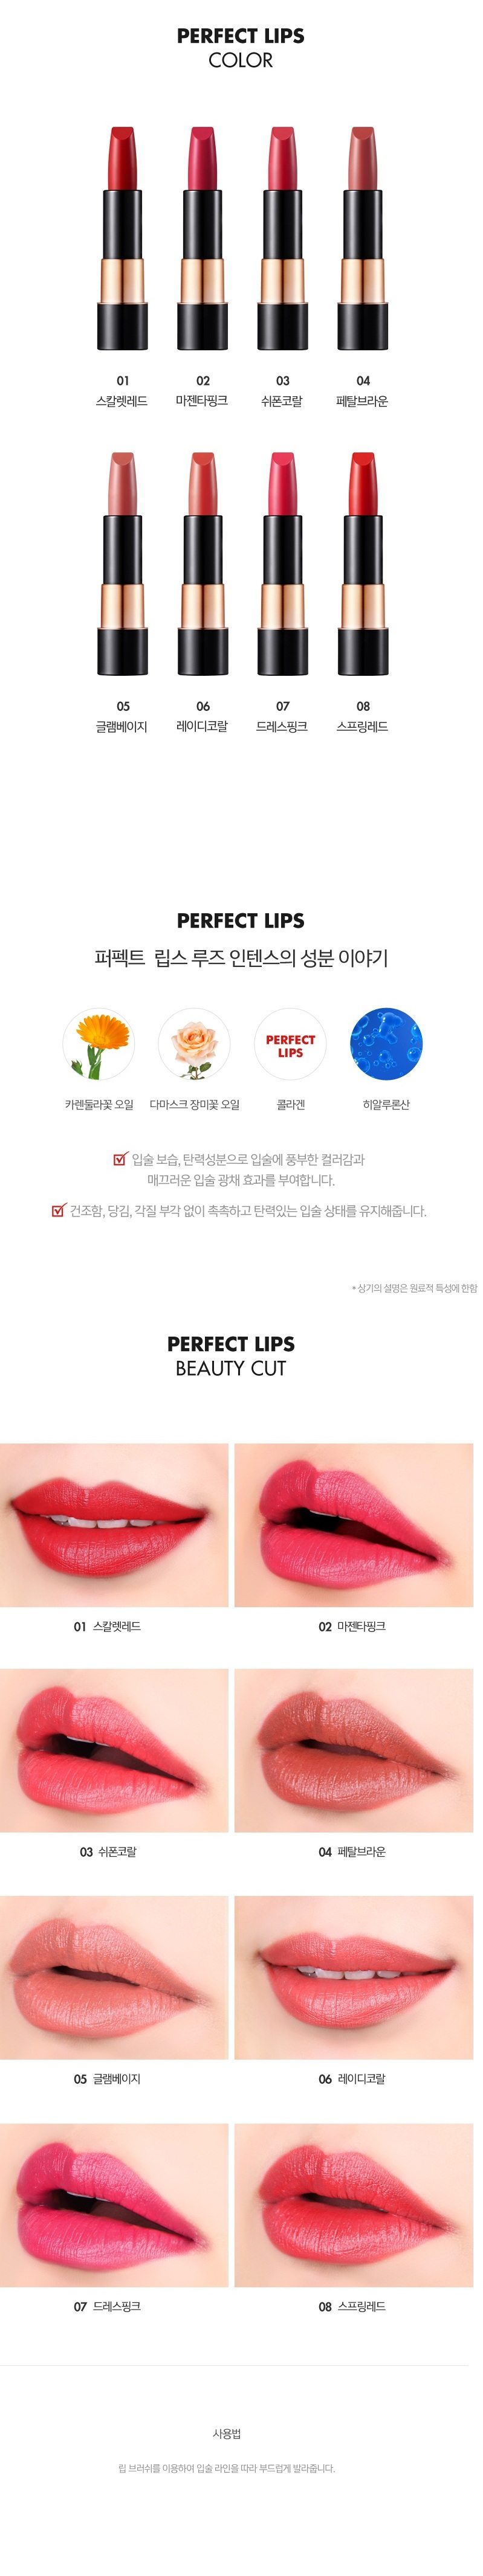 Tony Moly Perfect Lips Rouge Intense korean cosmetic makeup product online shop malaysia spain portugal2